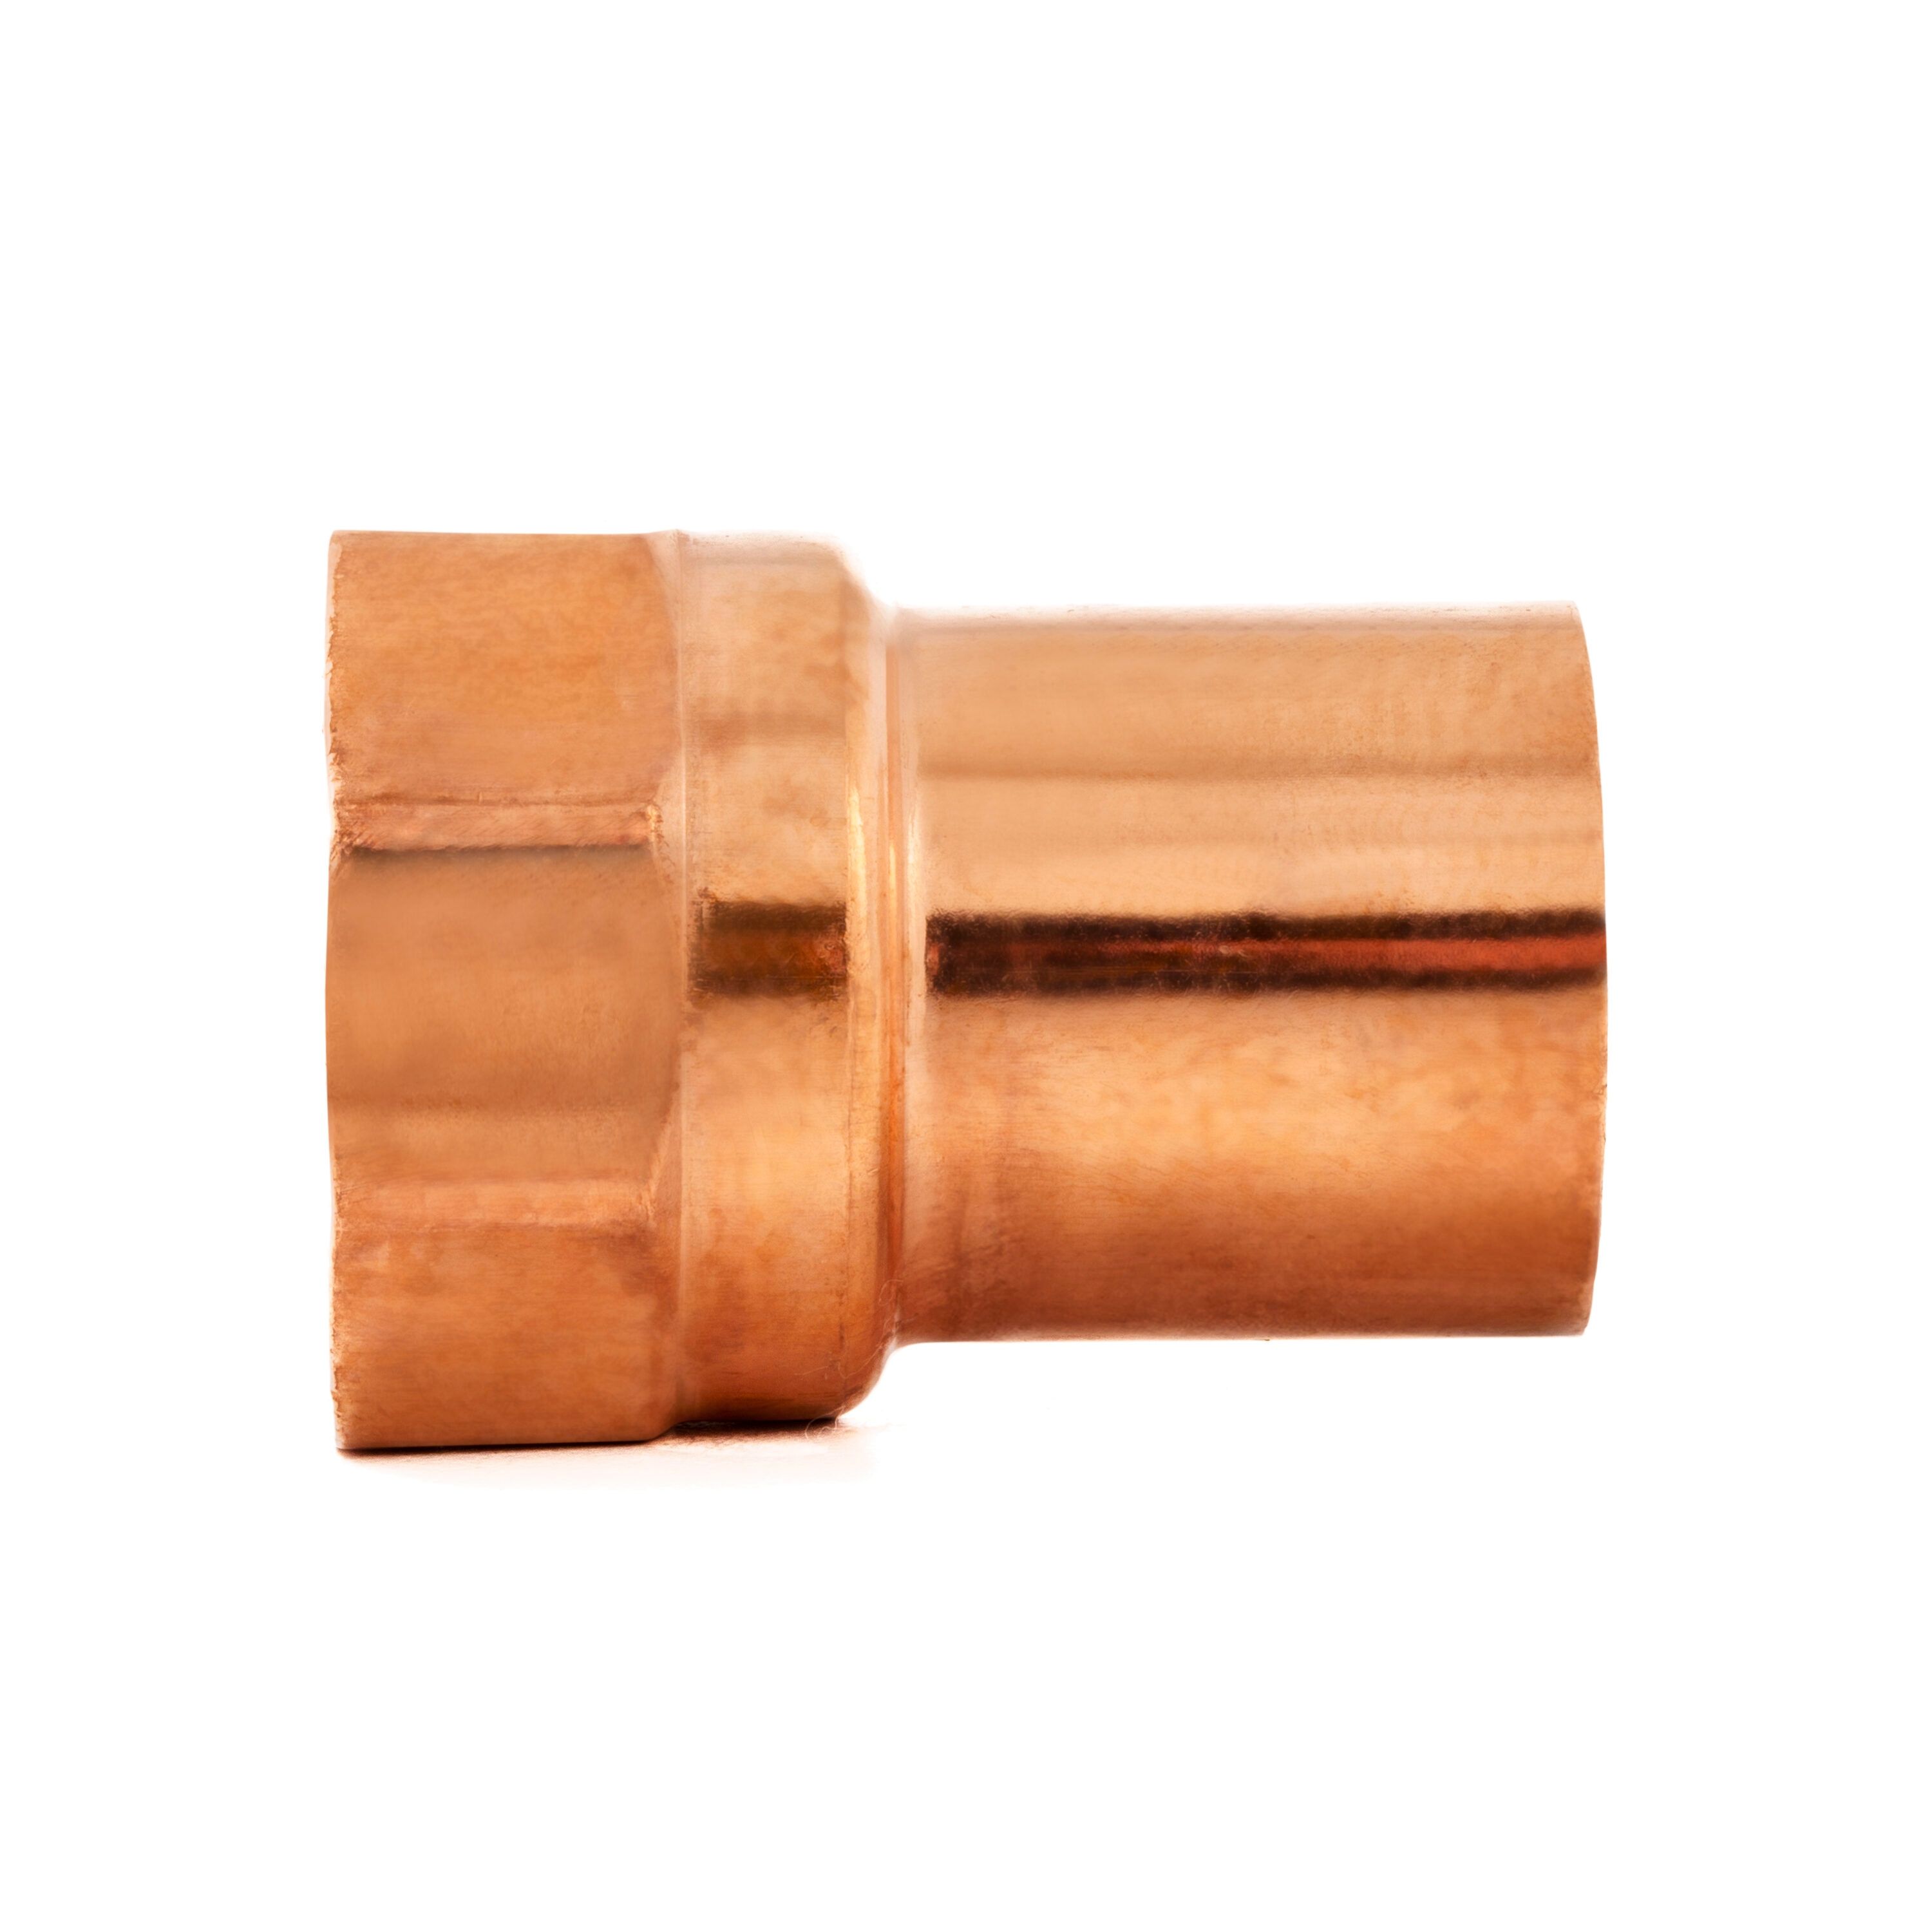 32in X 1/8ips Threaded Unfinished Copper Pipe with 3/4in Long Threaded Ends.